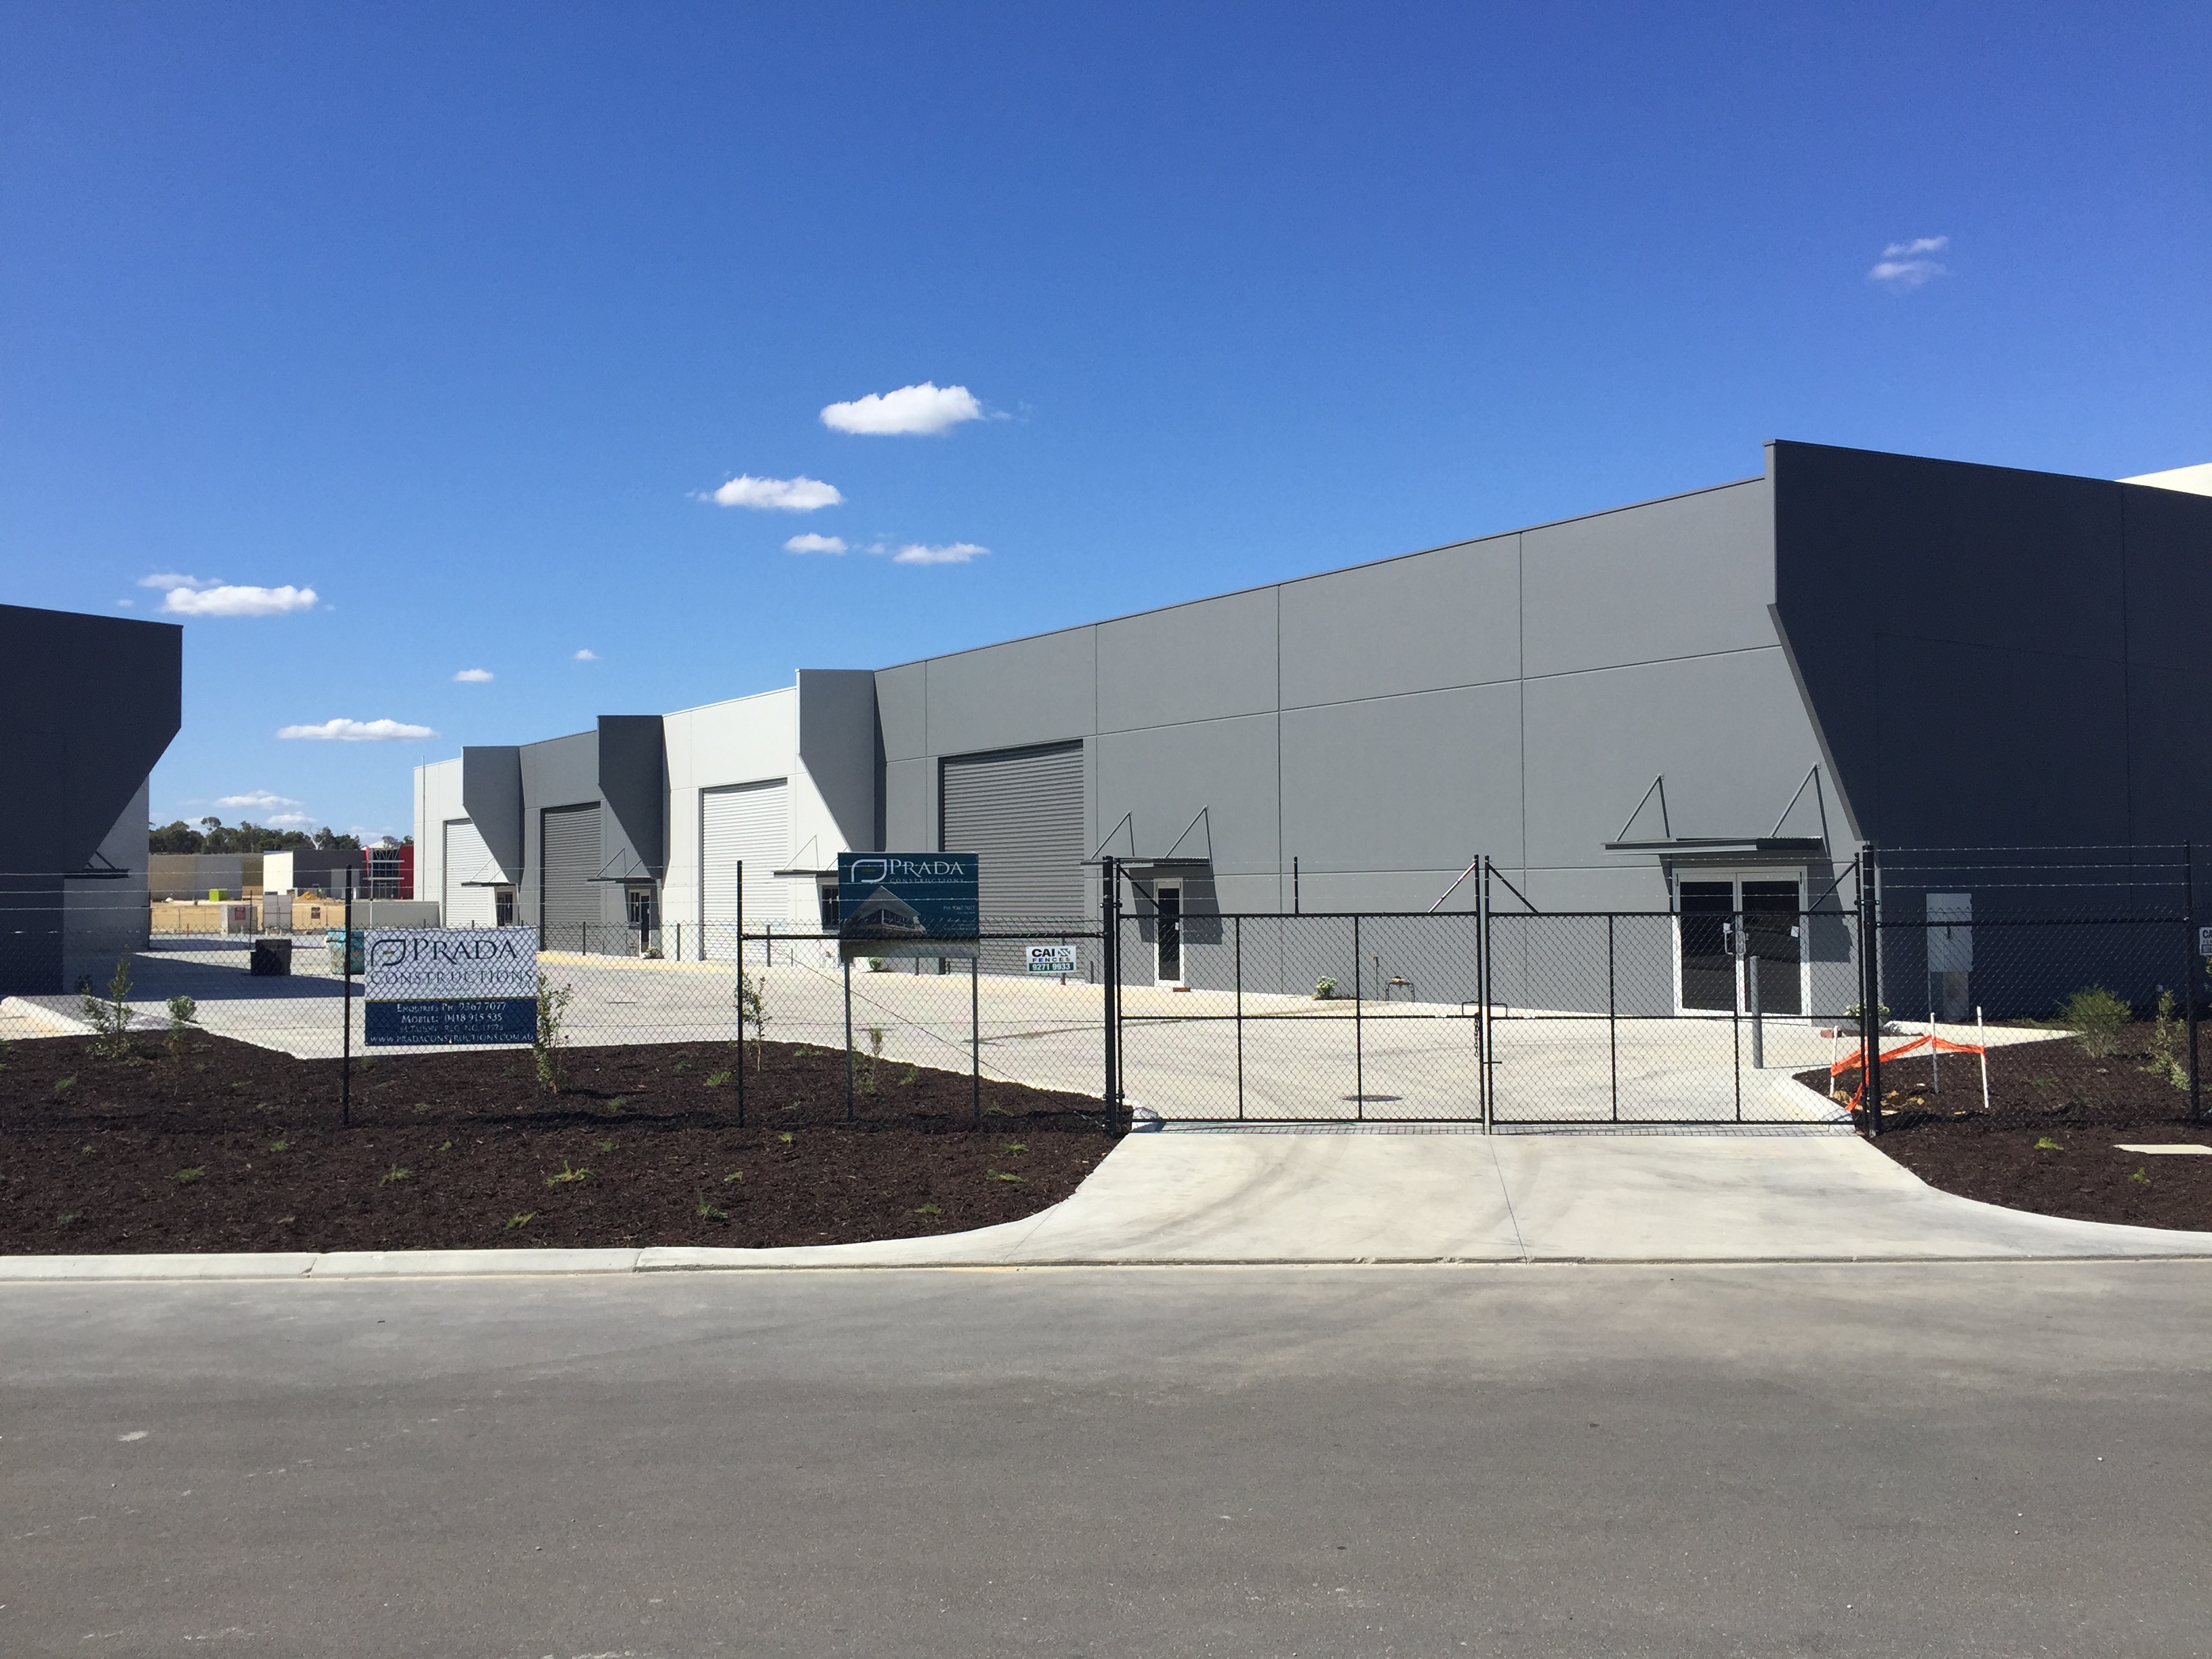 Exterior shot of securely fenced commercial warehouse units, painted in grey and white